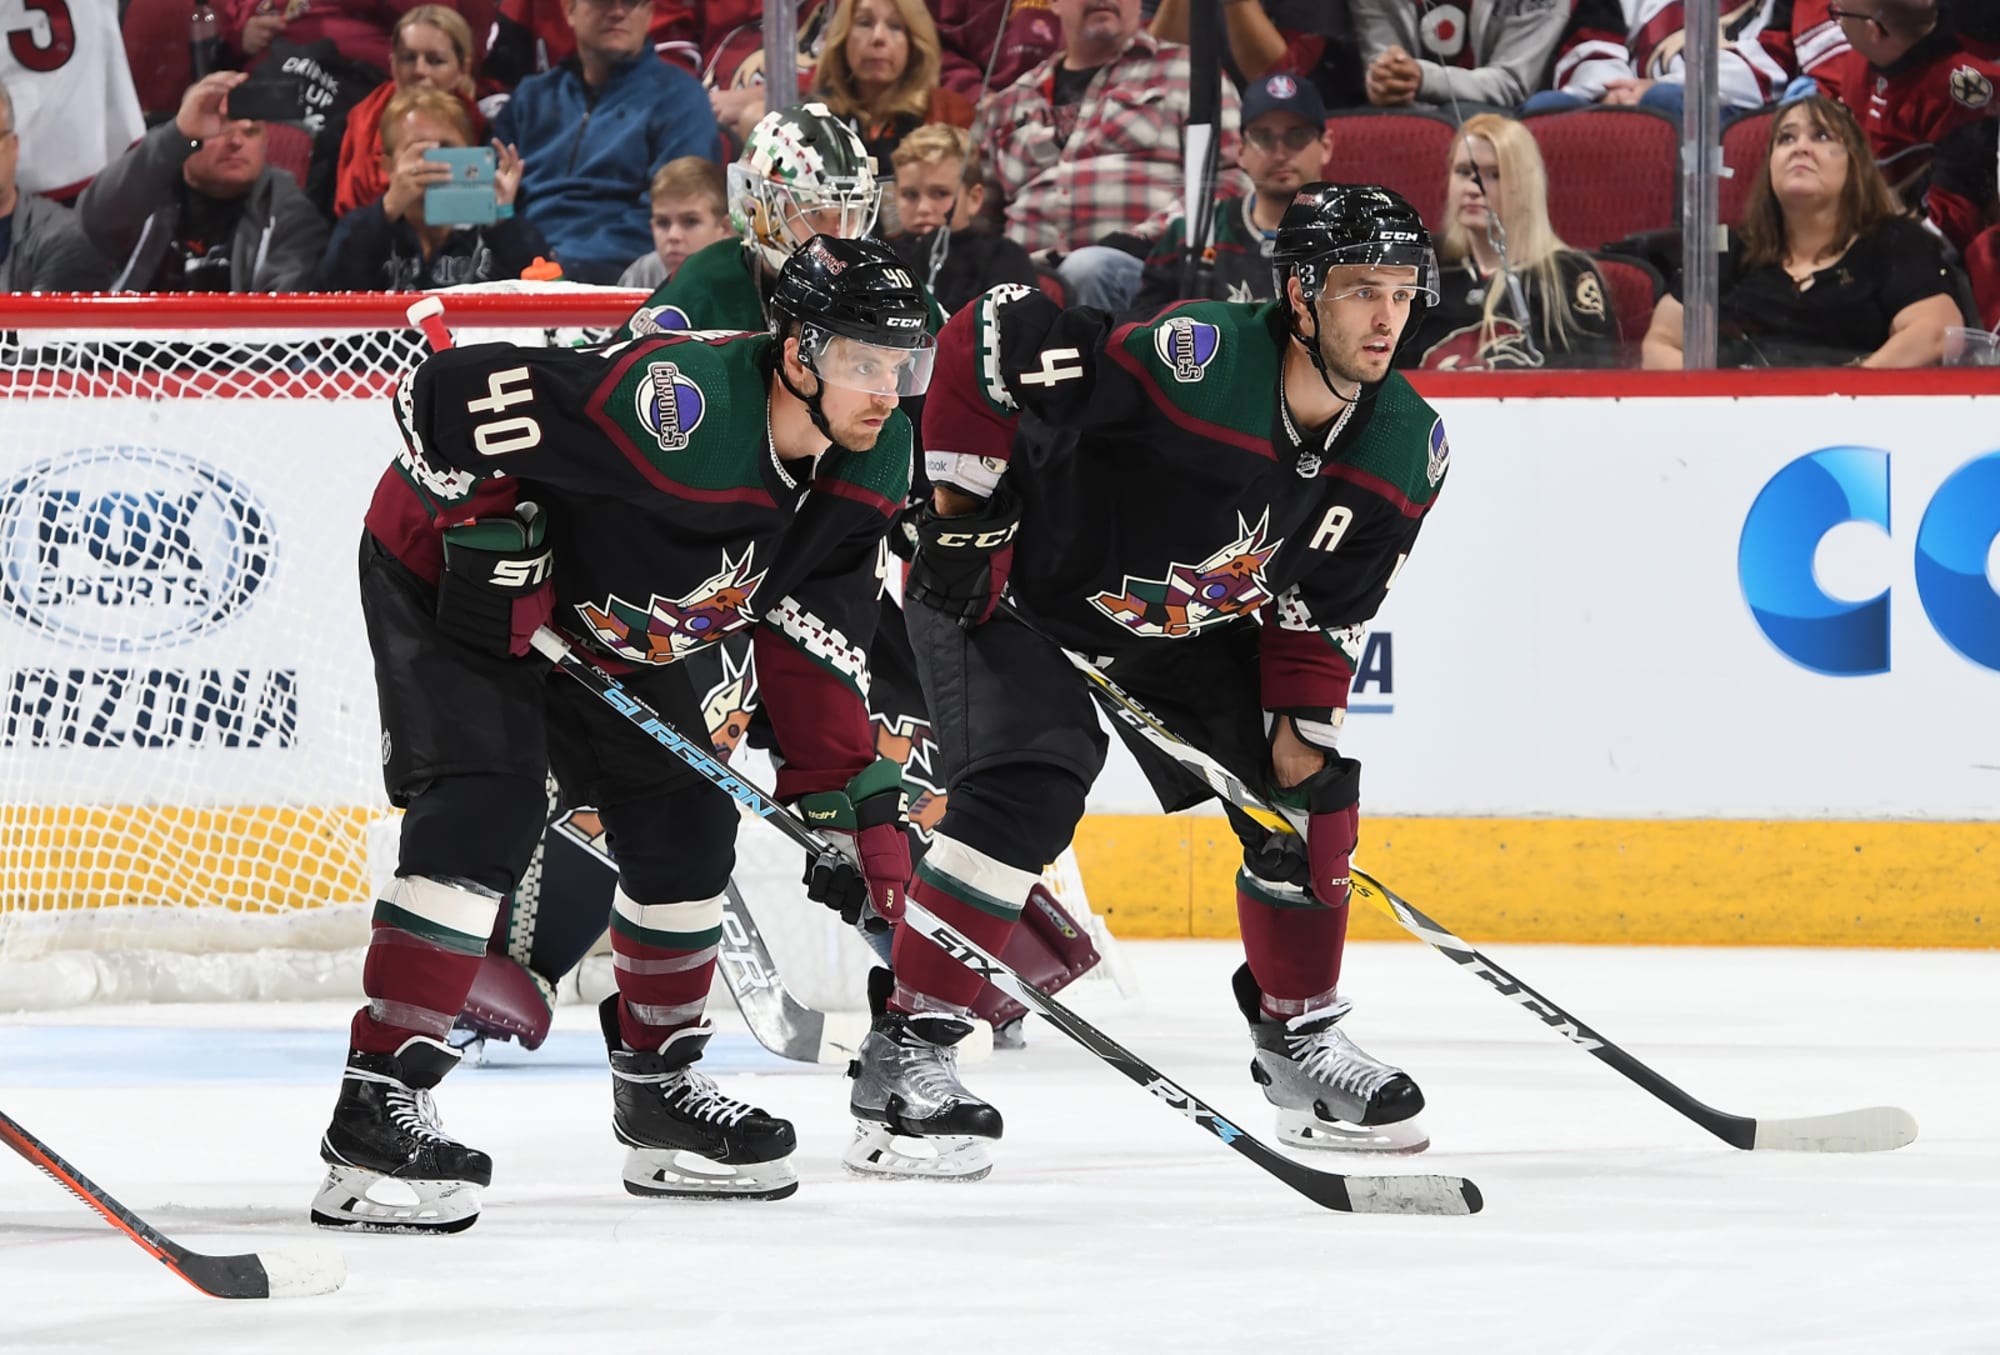 Arizona Coyotes 'disappointed' by Glendale arena decision